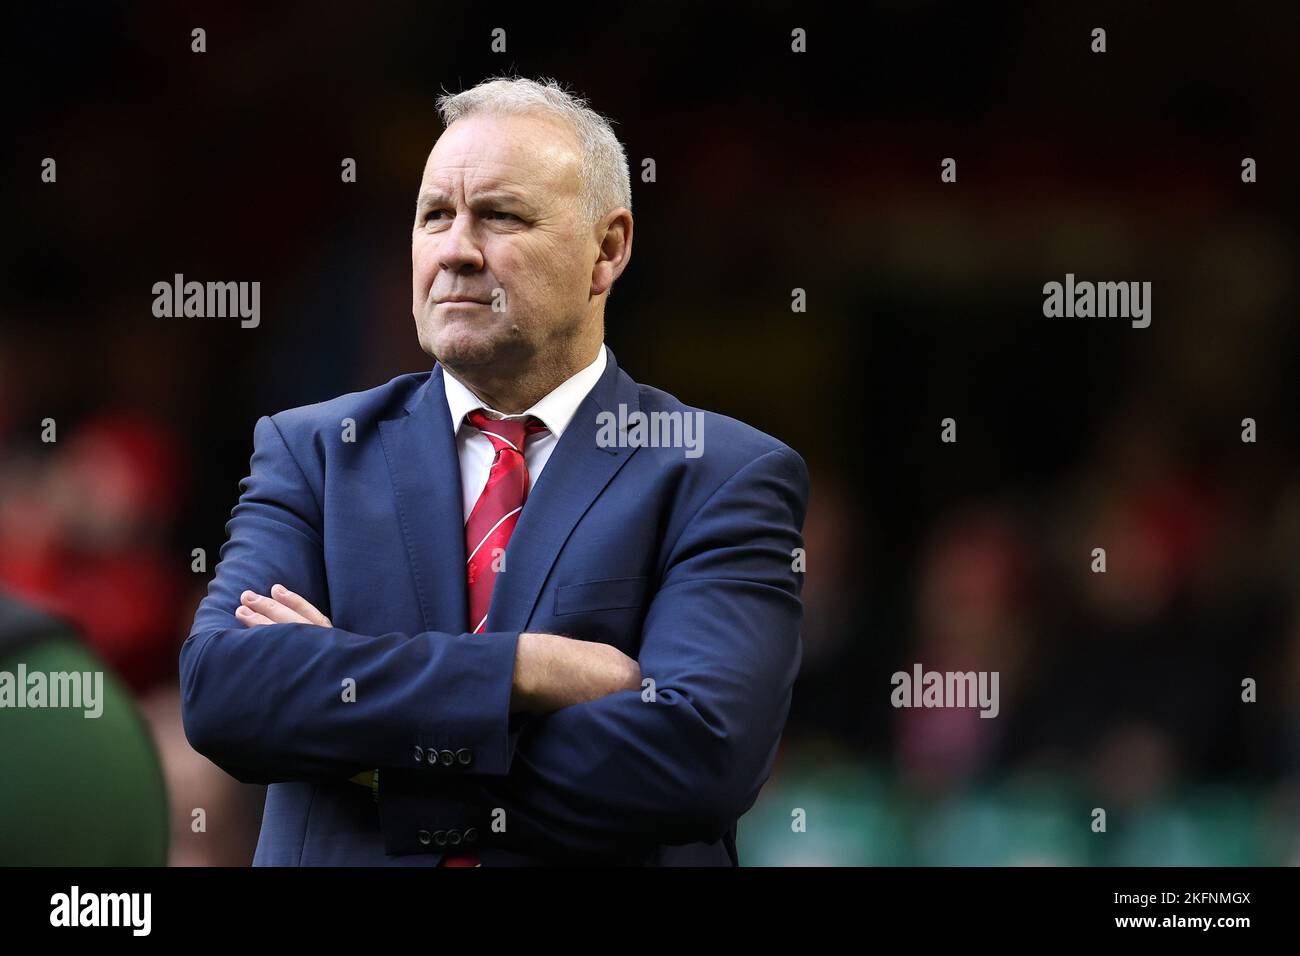 Cardiff, UK. 19th Nov, 2022. Wayne Pivac, the head coach of Wales rugby team looks on before the game. Autumn nations series 2022 rugby match, Wales v Georgia at the Principality Stadium in Cardiff on Saturday 19th November 2022. pic by Andrew Orchard/Andrew Orchard sports photography/Alamy Live News Credit: Andrew Orchard sports photography/Alamy Live News Stock Photo